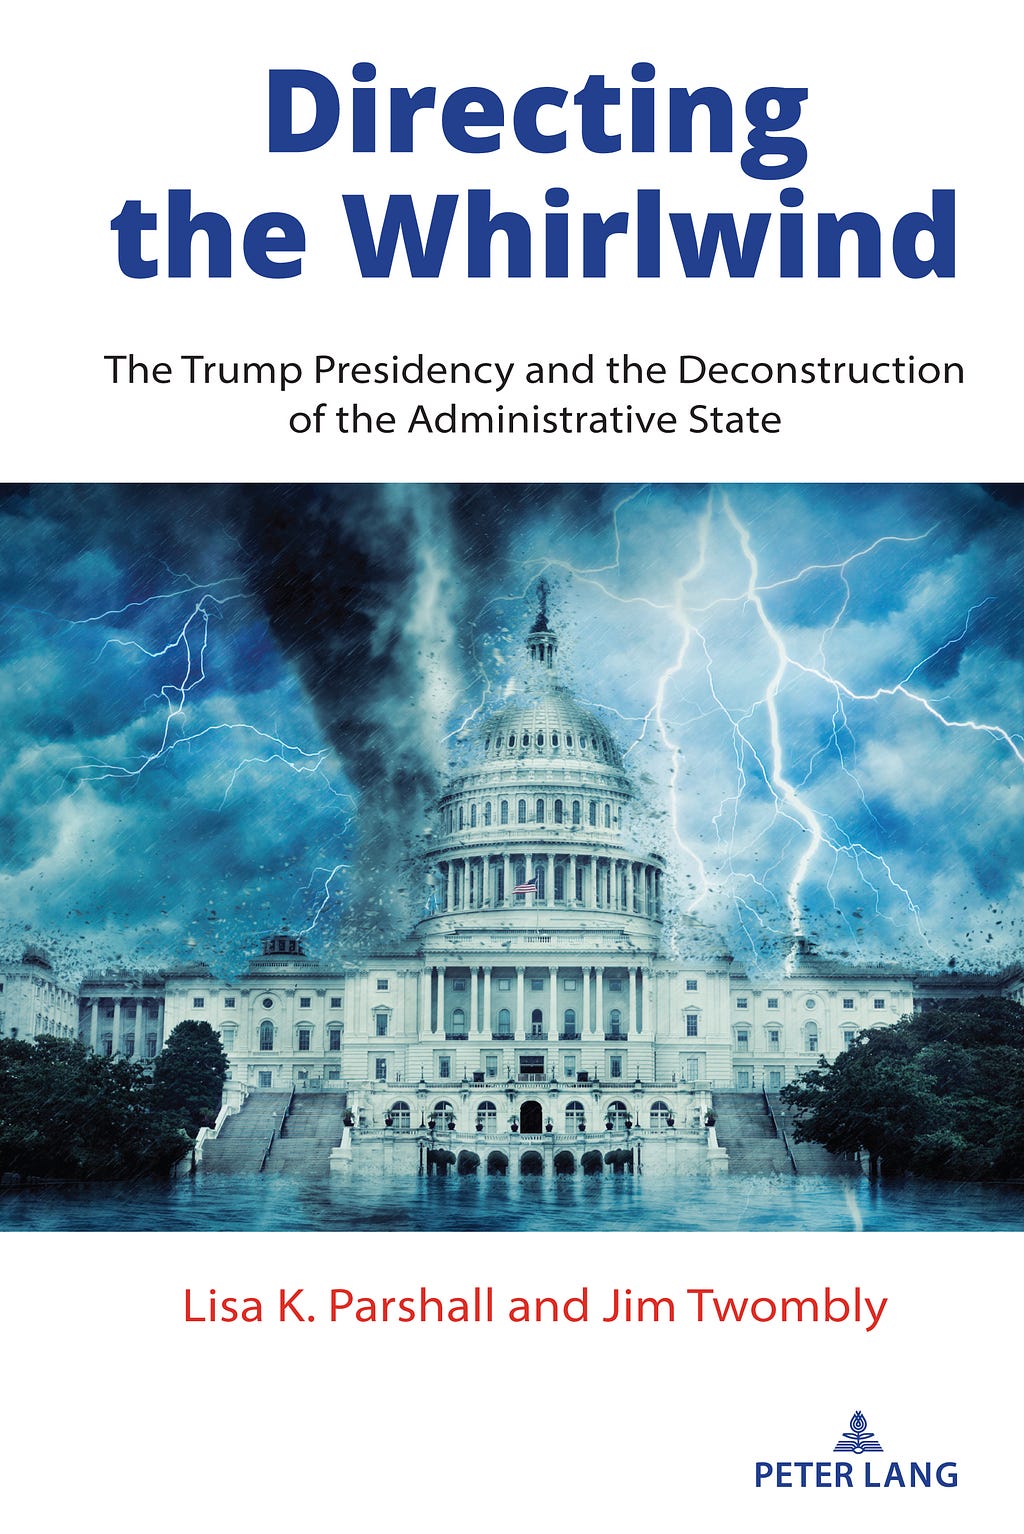 Cover Art of the book Directing the Whirlwind: Image of a tornado hitting Washington, DC capitol building. Peter Lang 2020